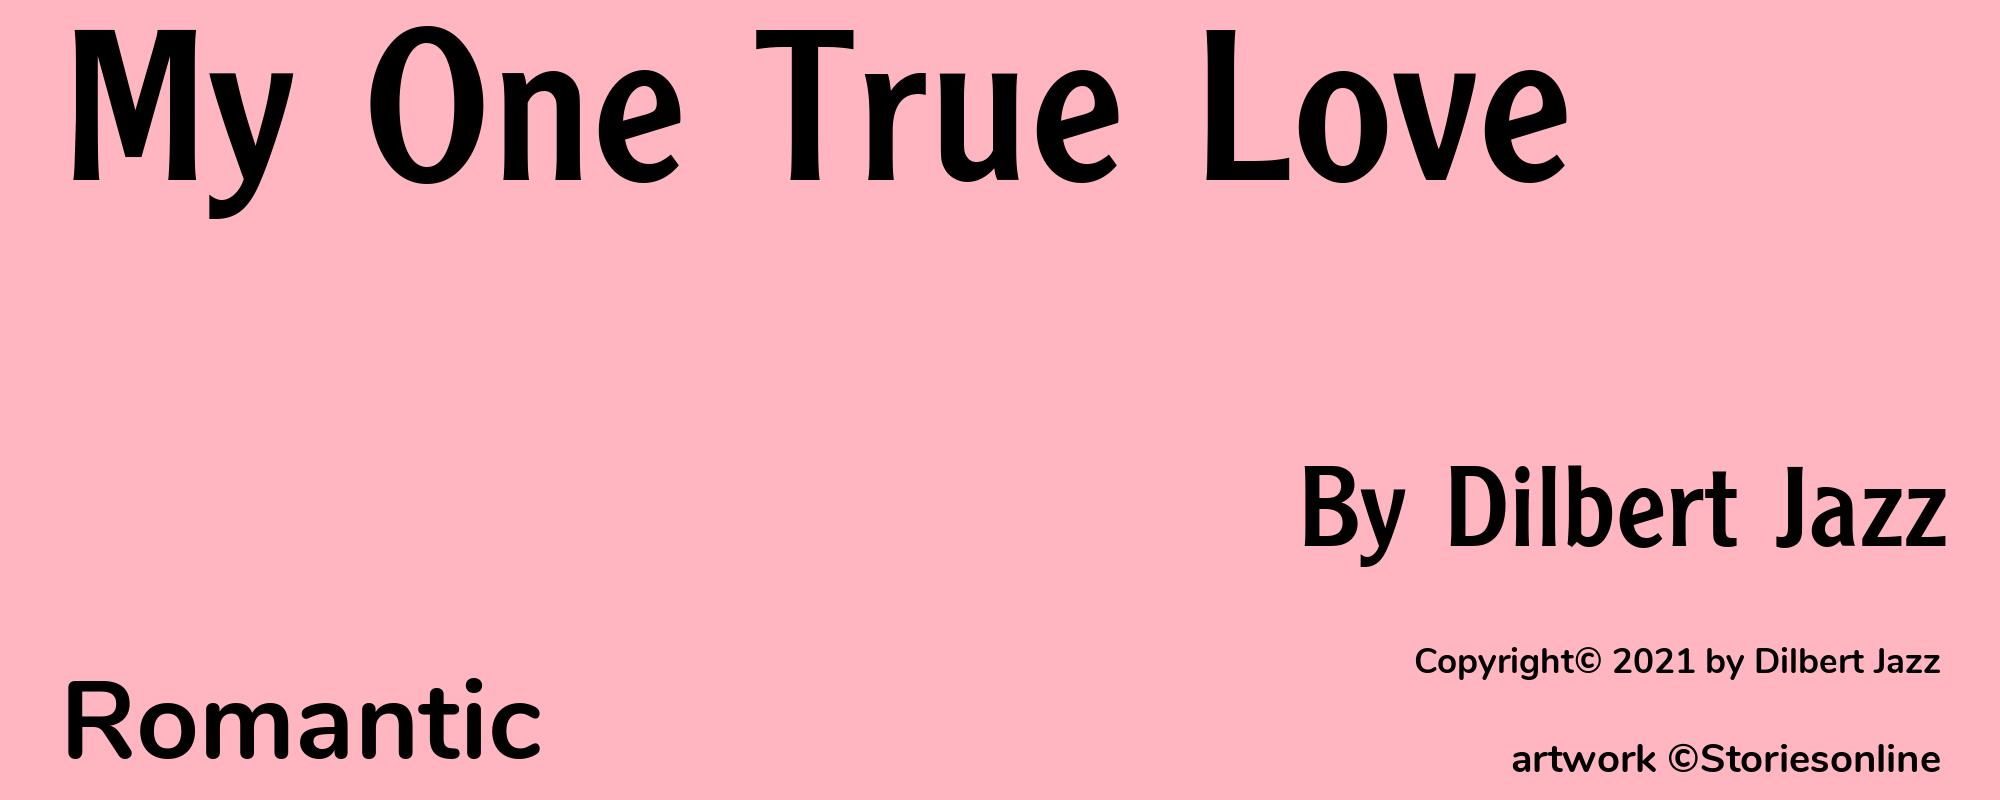 My One True Love - Cover